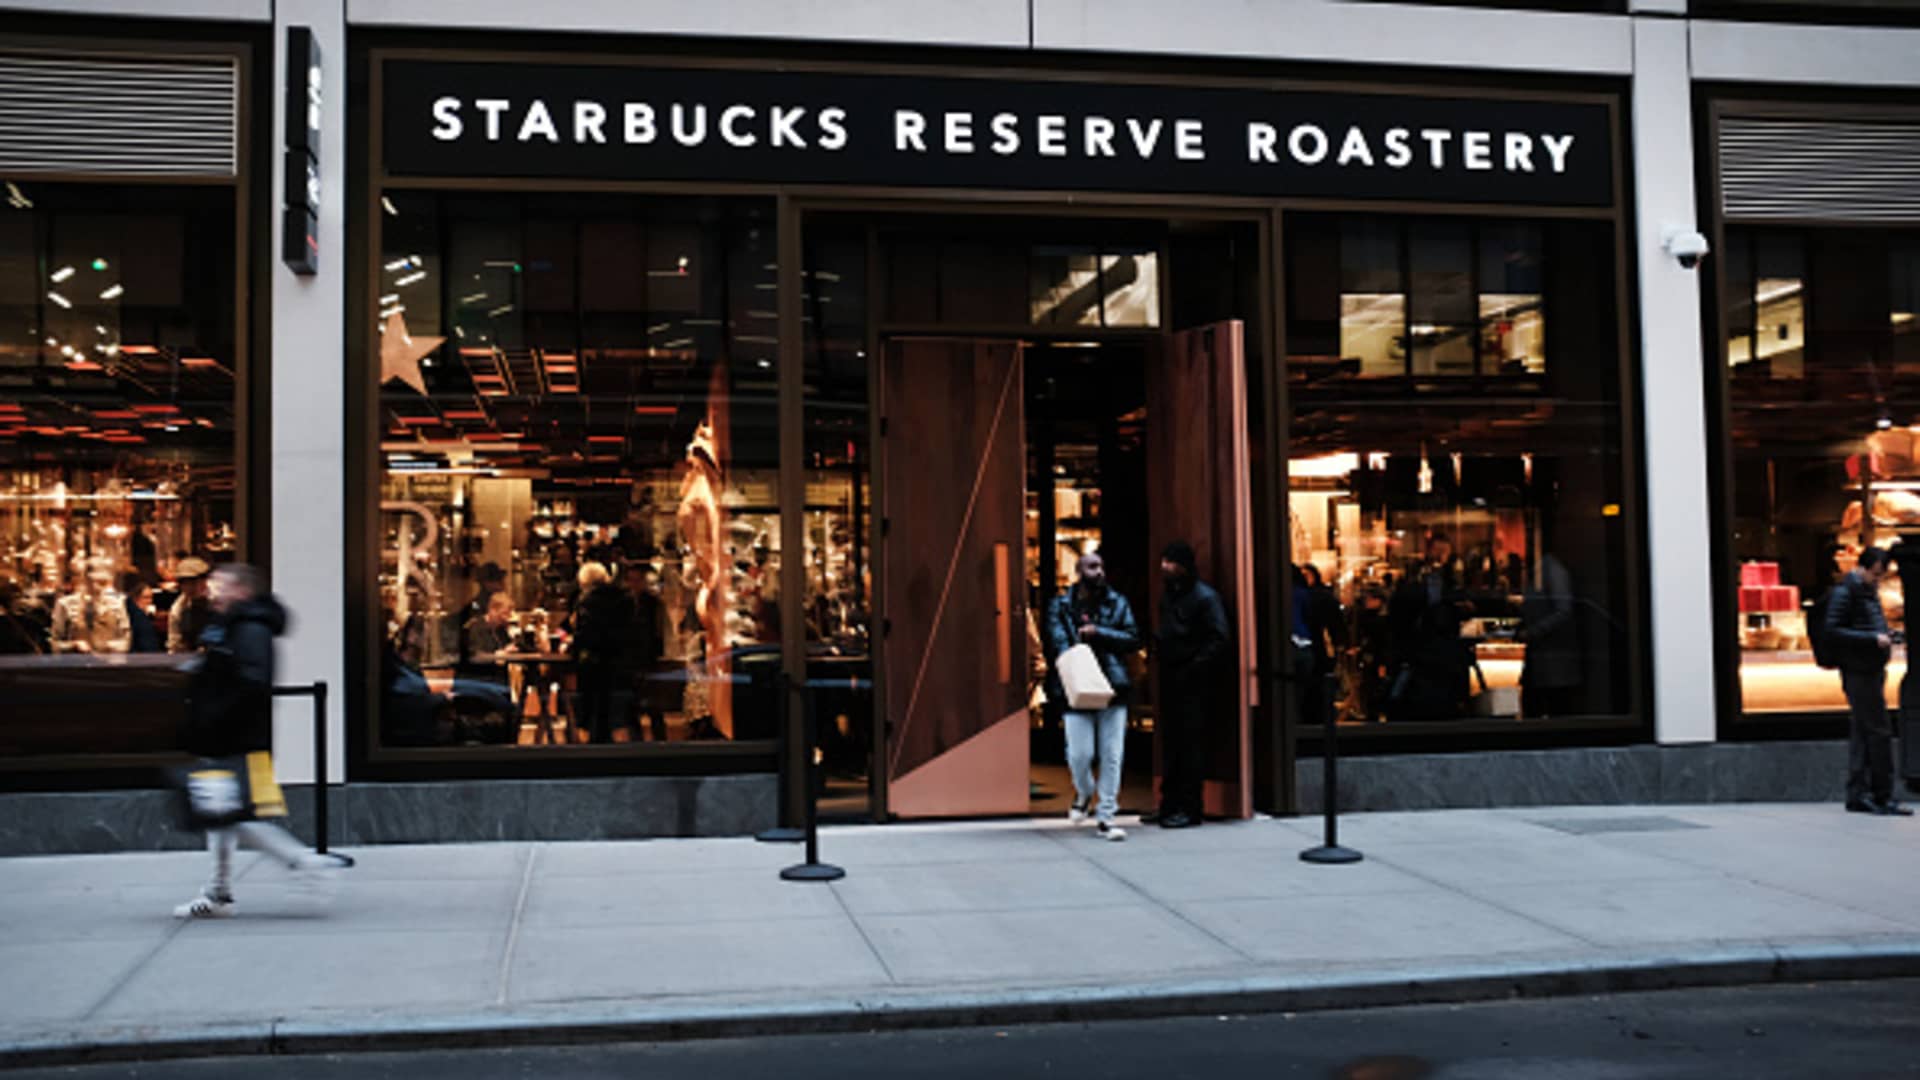 ]People exit a newly opened Starbucks' Reserve Roasteries in the Meatpacking District on on December 14, 2018 in New York City.